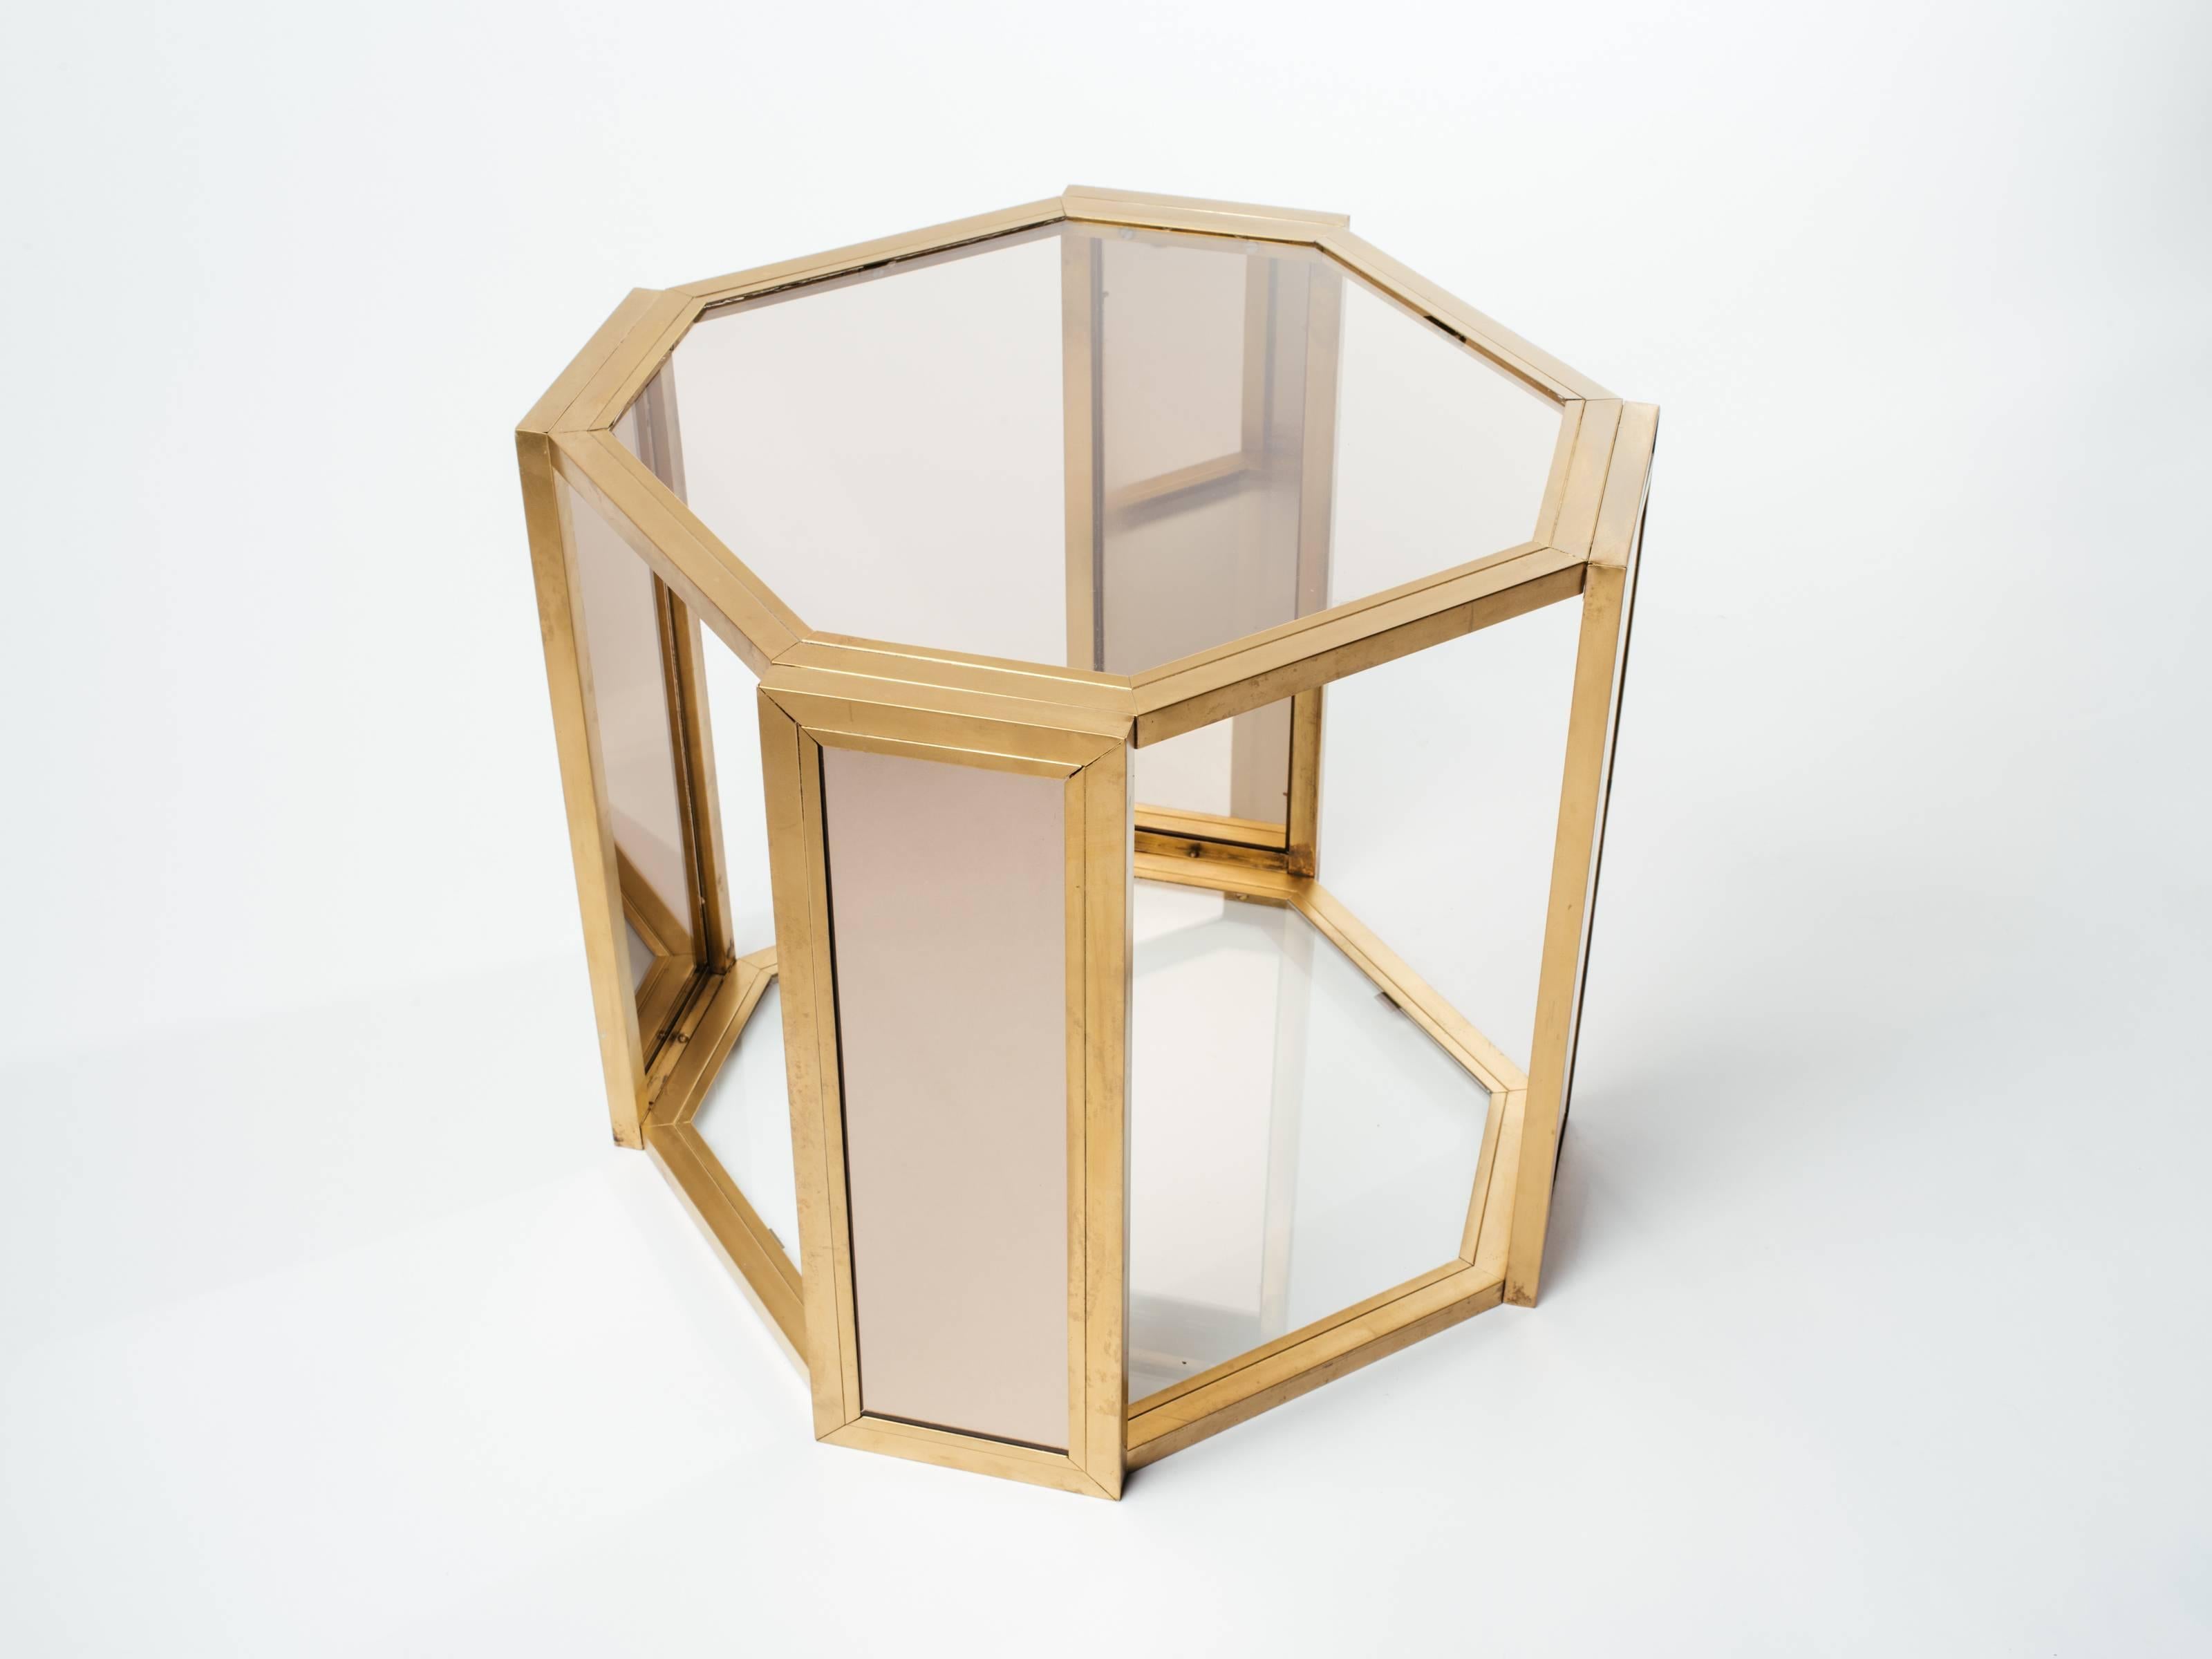 Bronzed Pair of Hexagon Two Tier Side Tables in Brass and Smoked Glass, c. 1970s For Sale